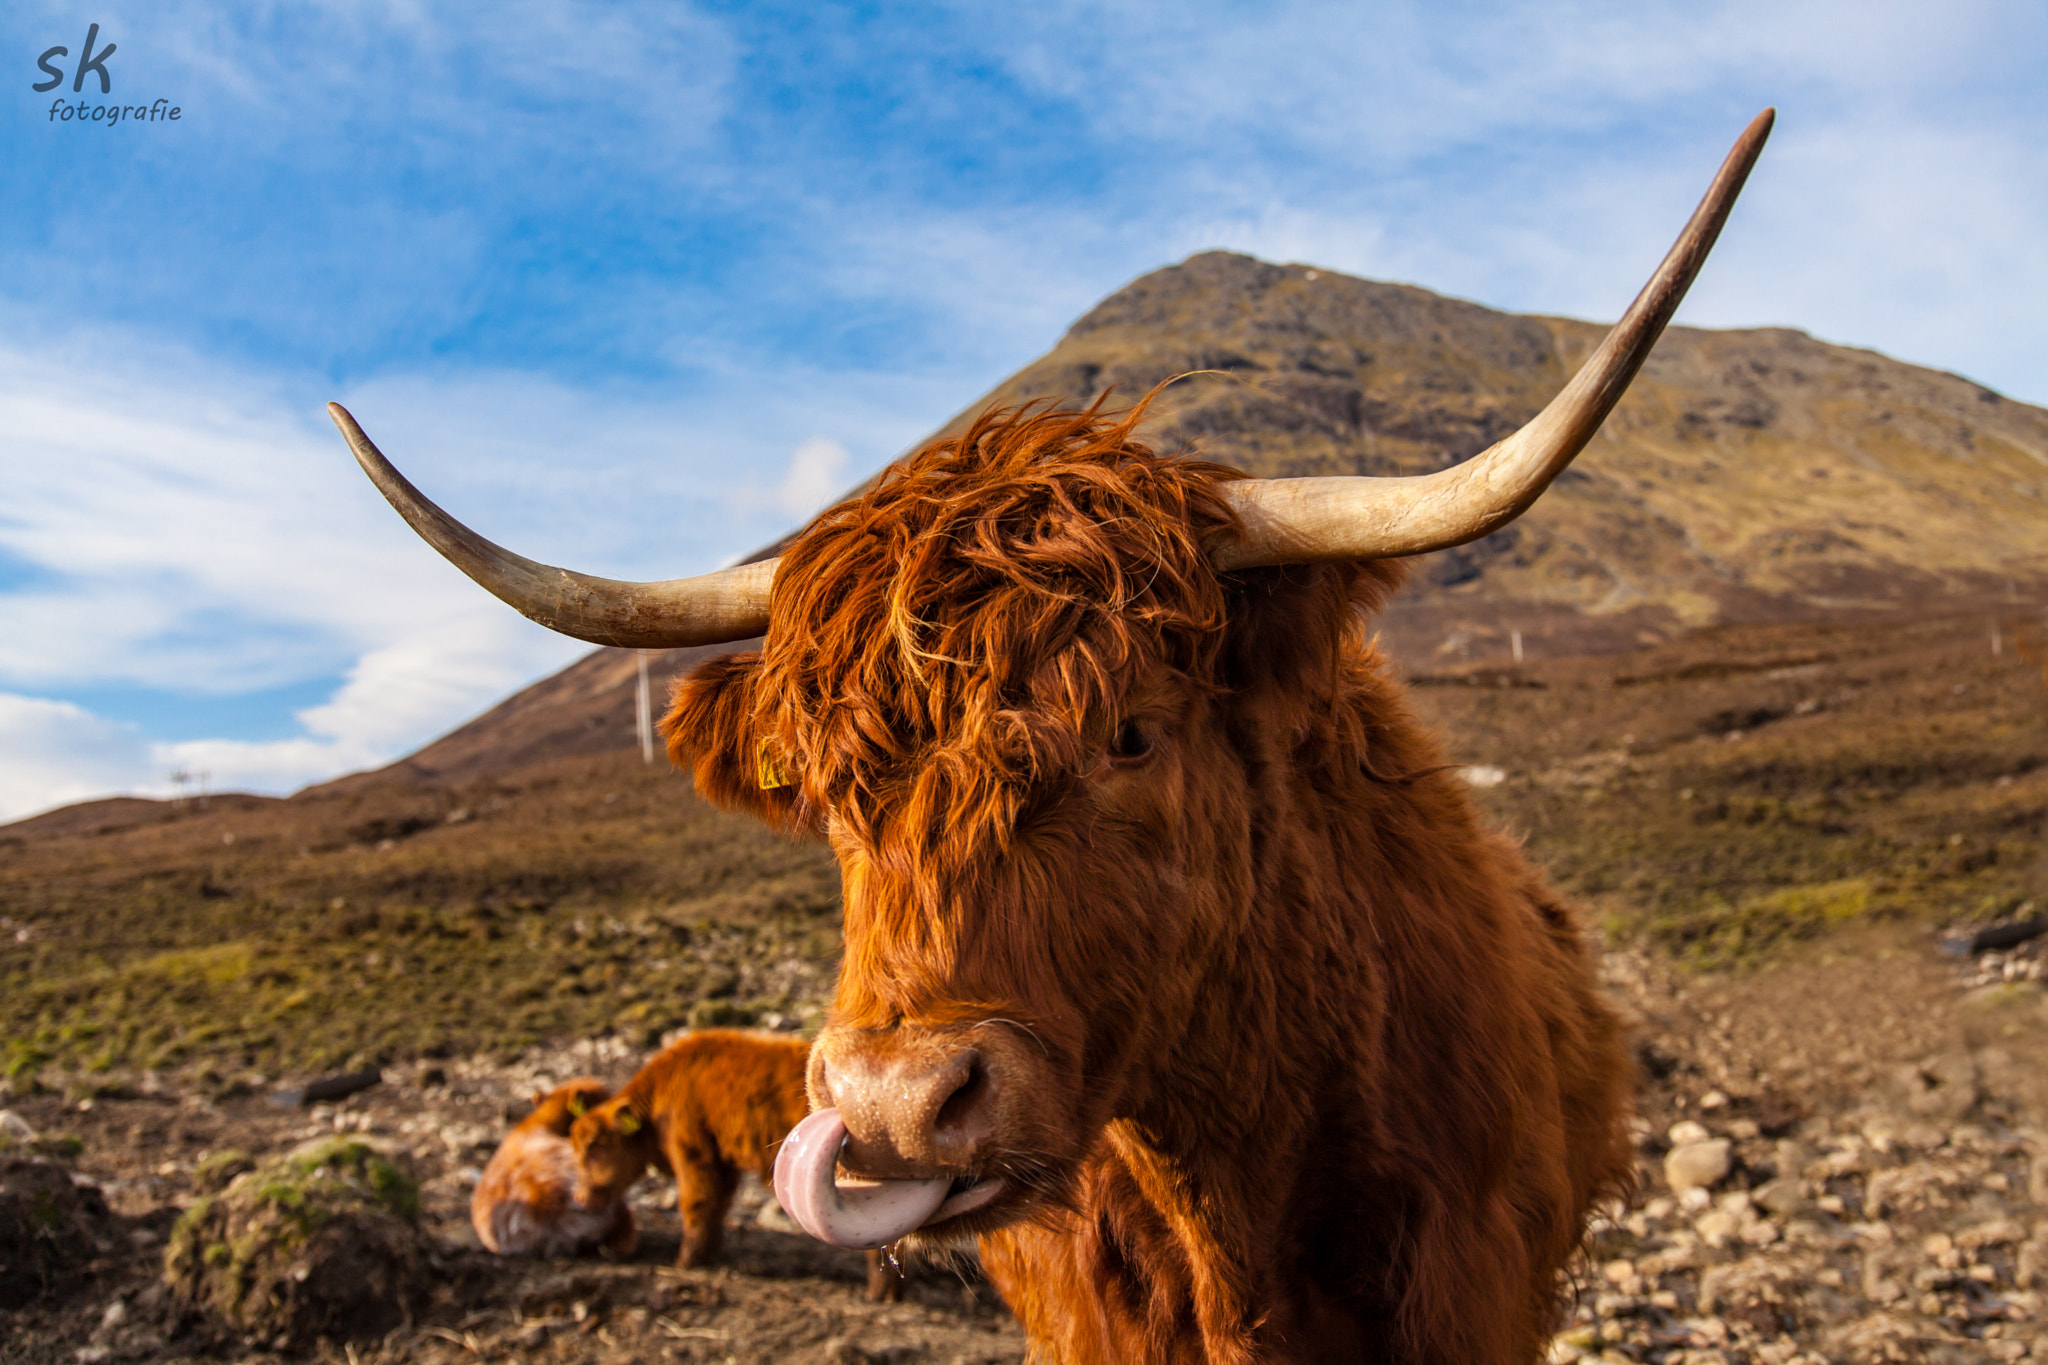 Canon EOS 5D Mark II + Sigma 24-105mm f/4 DG OS HSM | A sample photo. Highland cattle photography